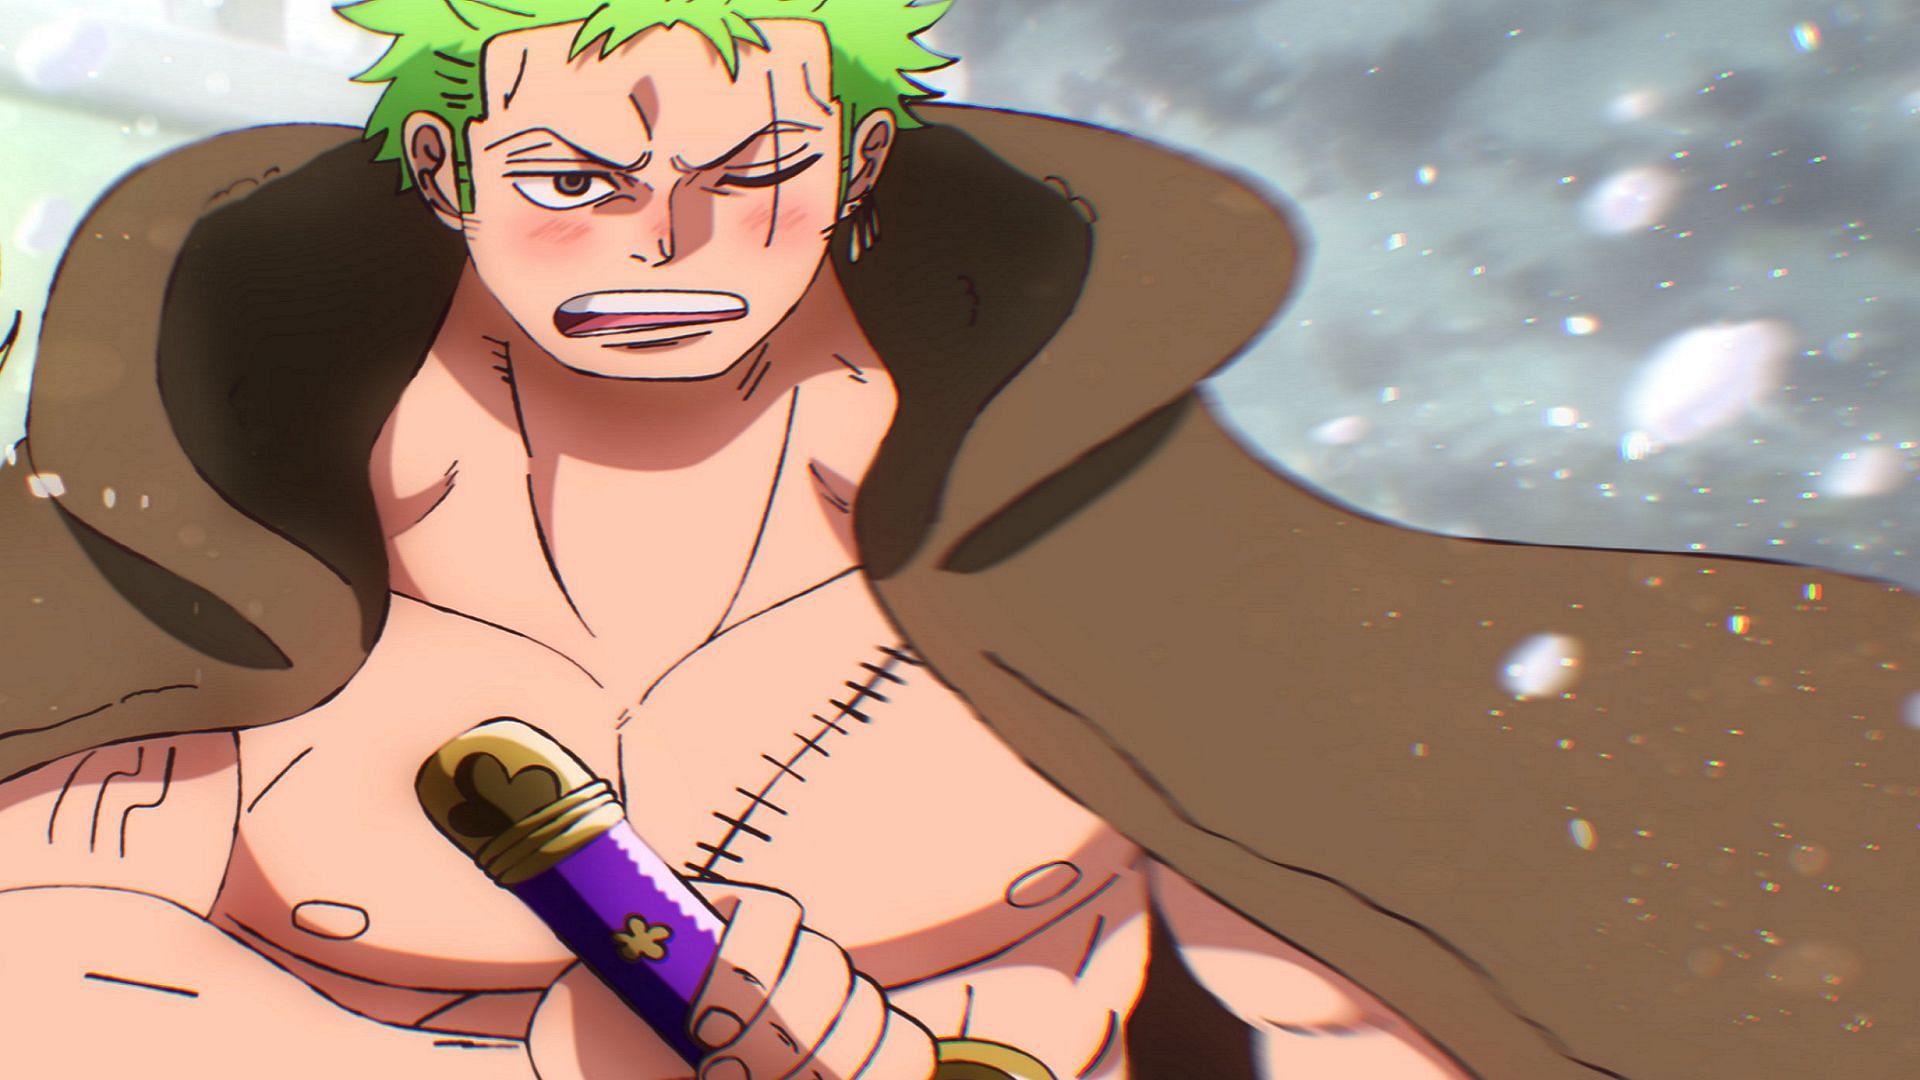 One Piece: Luffy's 7 Strongest Attacks, Ranked in Order - FandomWire